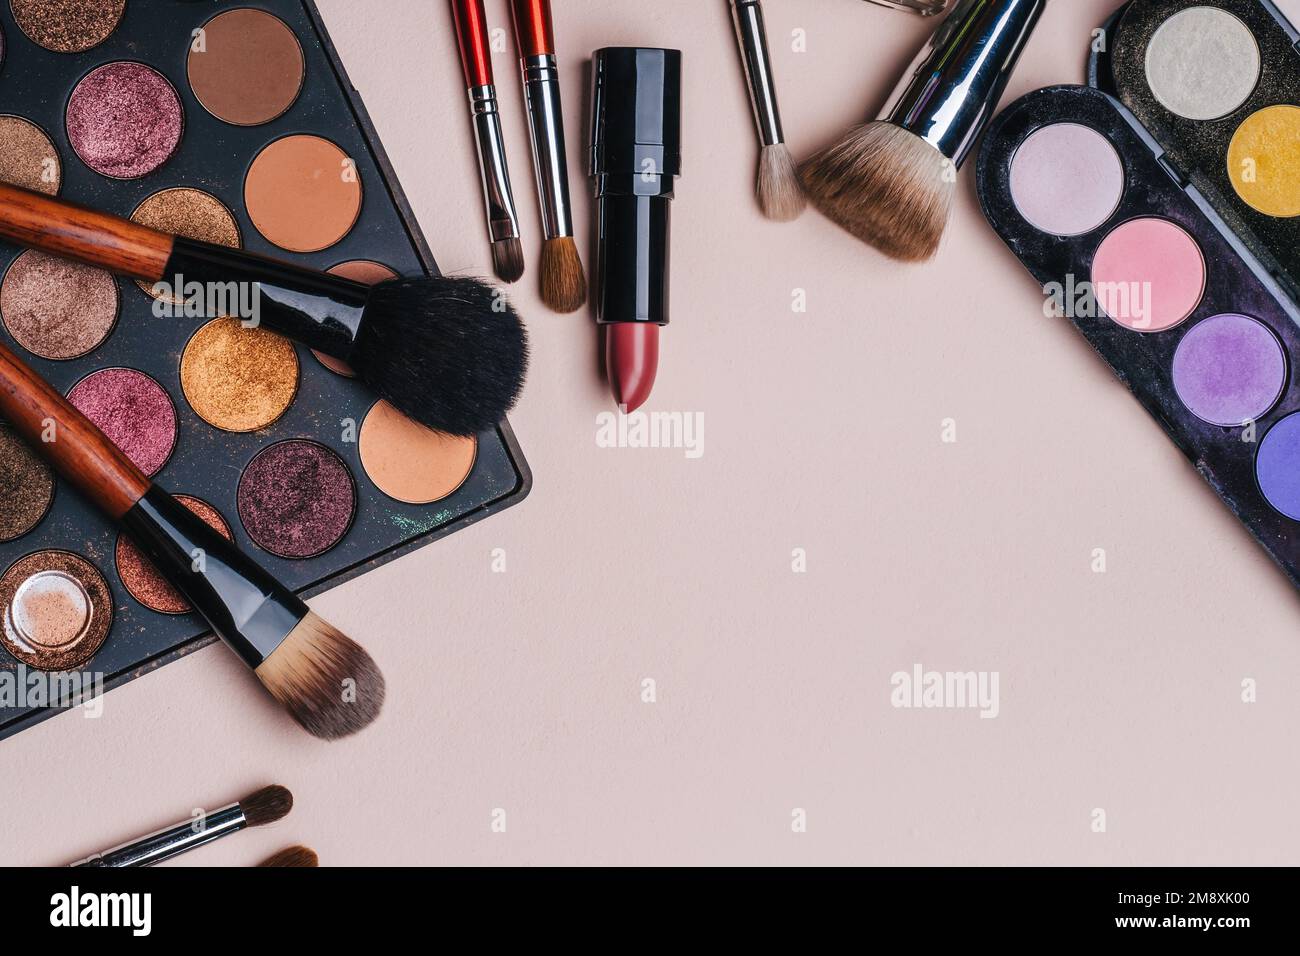 Set of professional cosmetics, makeup tools and accessories for women's beauty. Flat lay frame composition, top view. Stock Photo